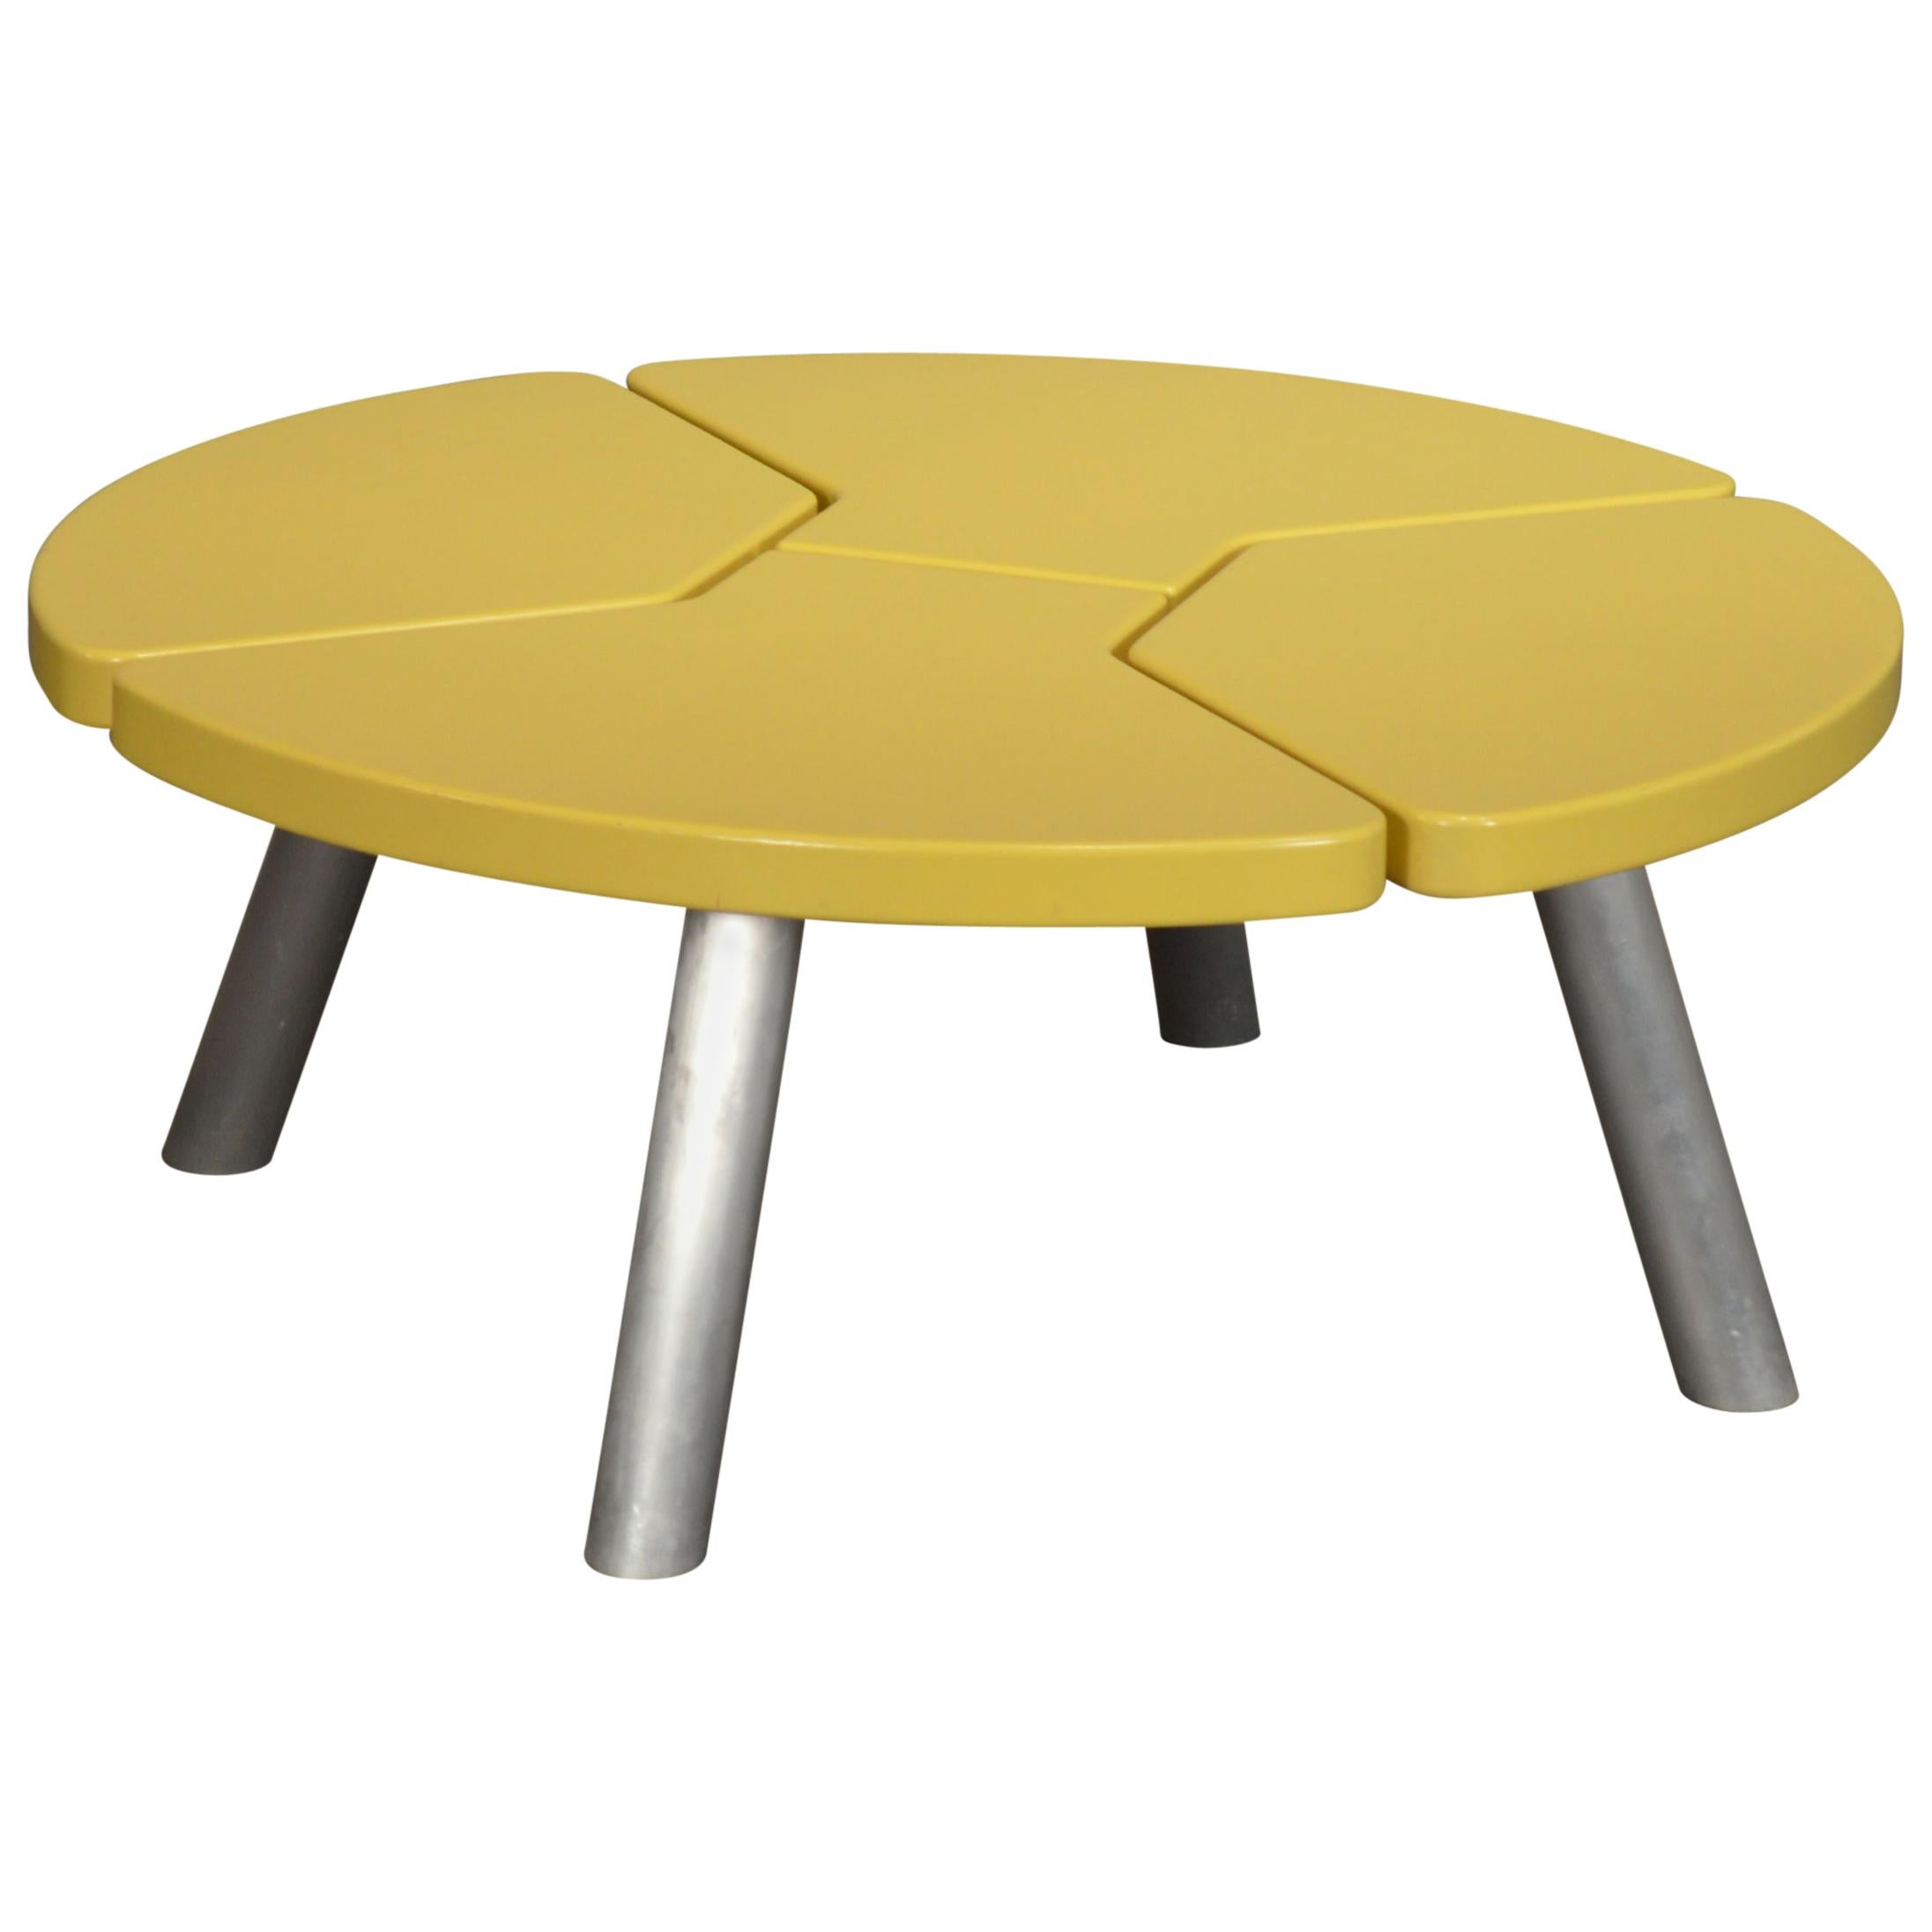 Angela Adams Mod Pod Coffee Table in Chartreuse For Sale